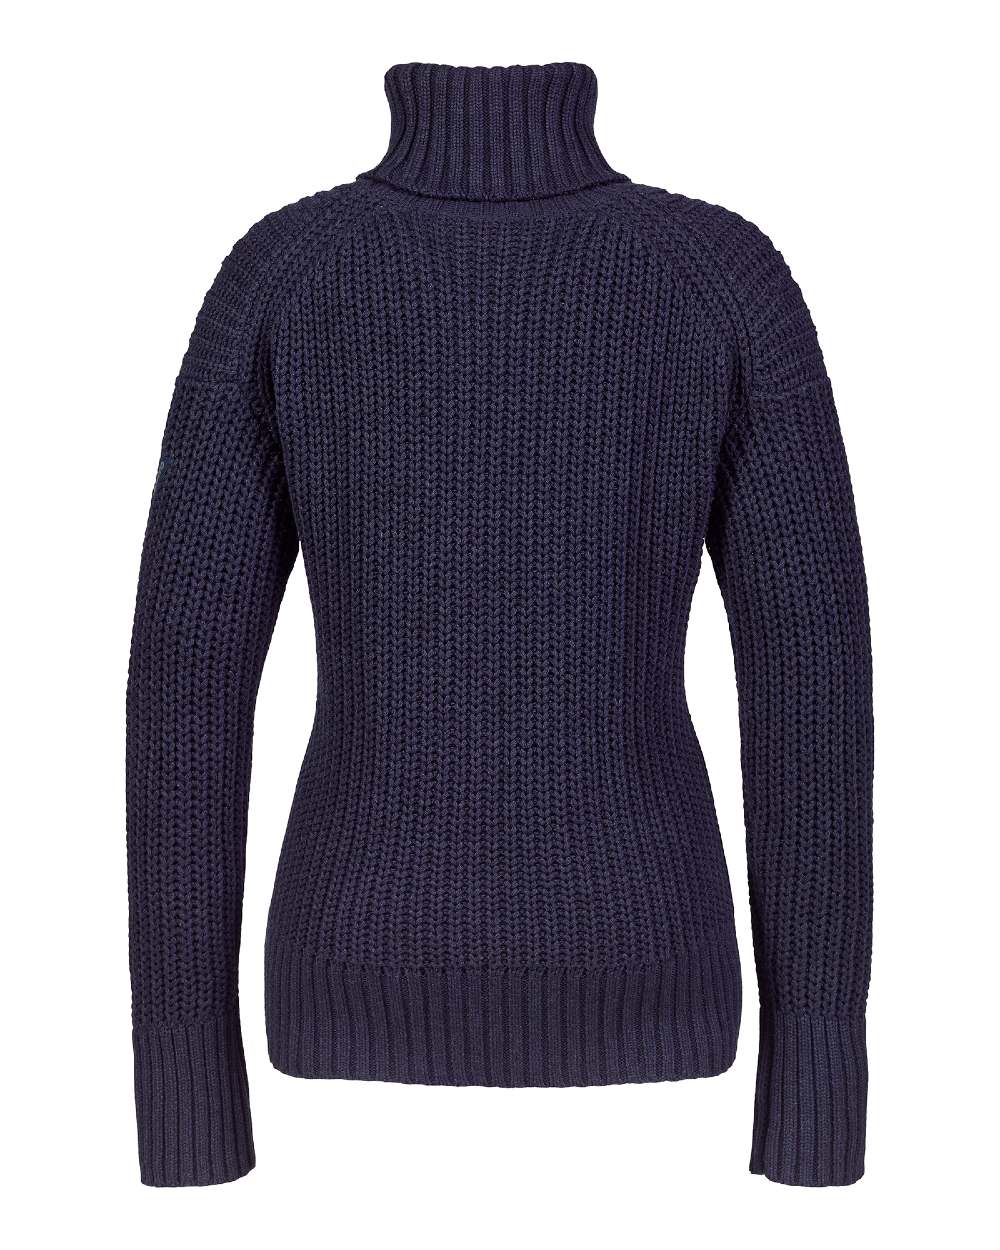 Navy coloured Musto Womens Marina Roll Neck Knit on white background 